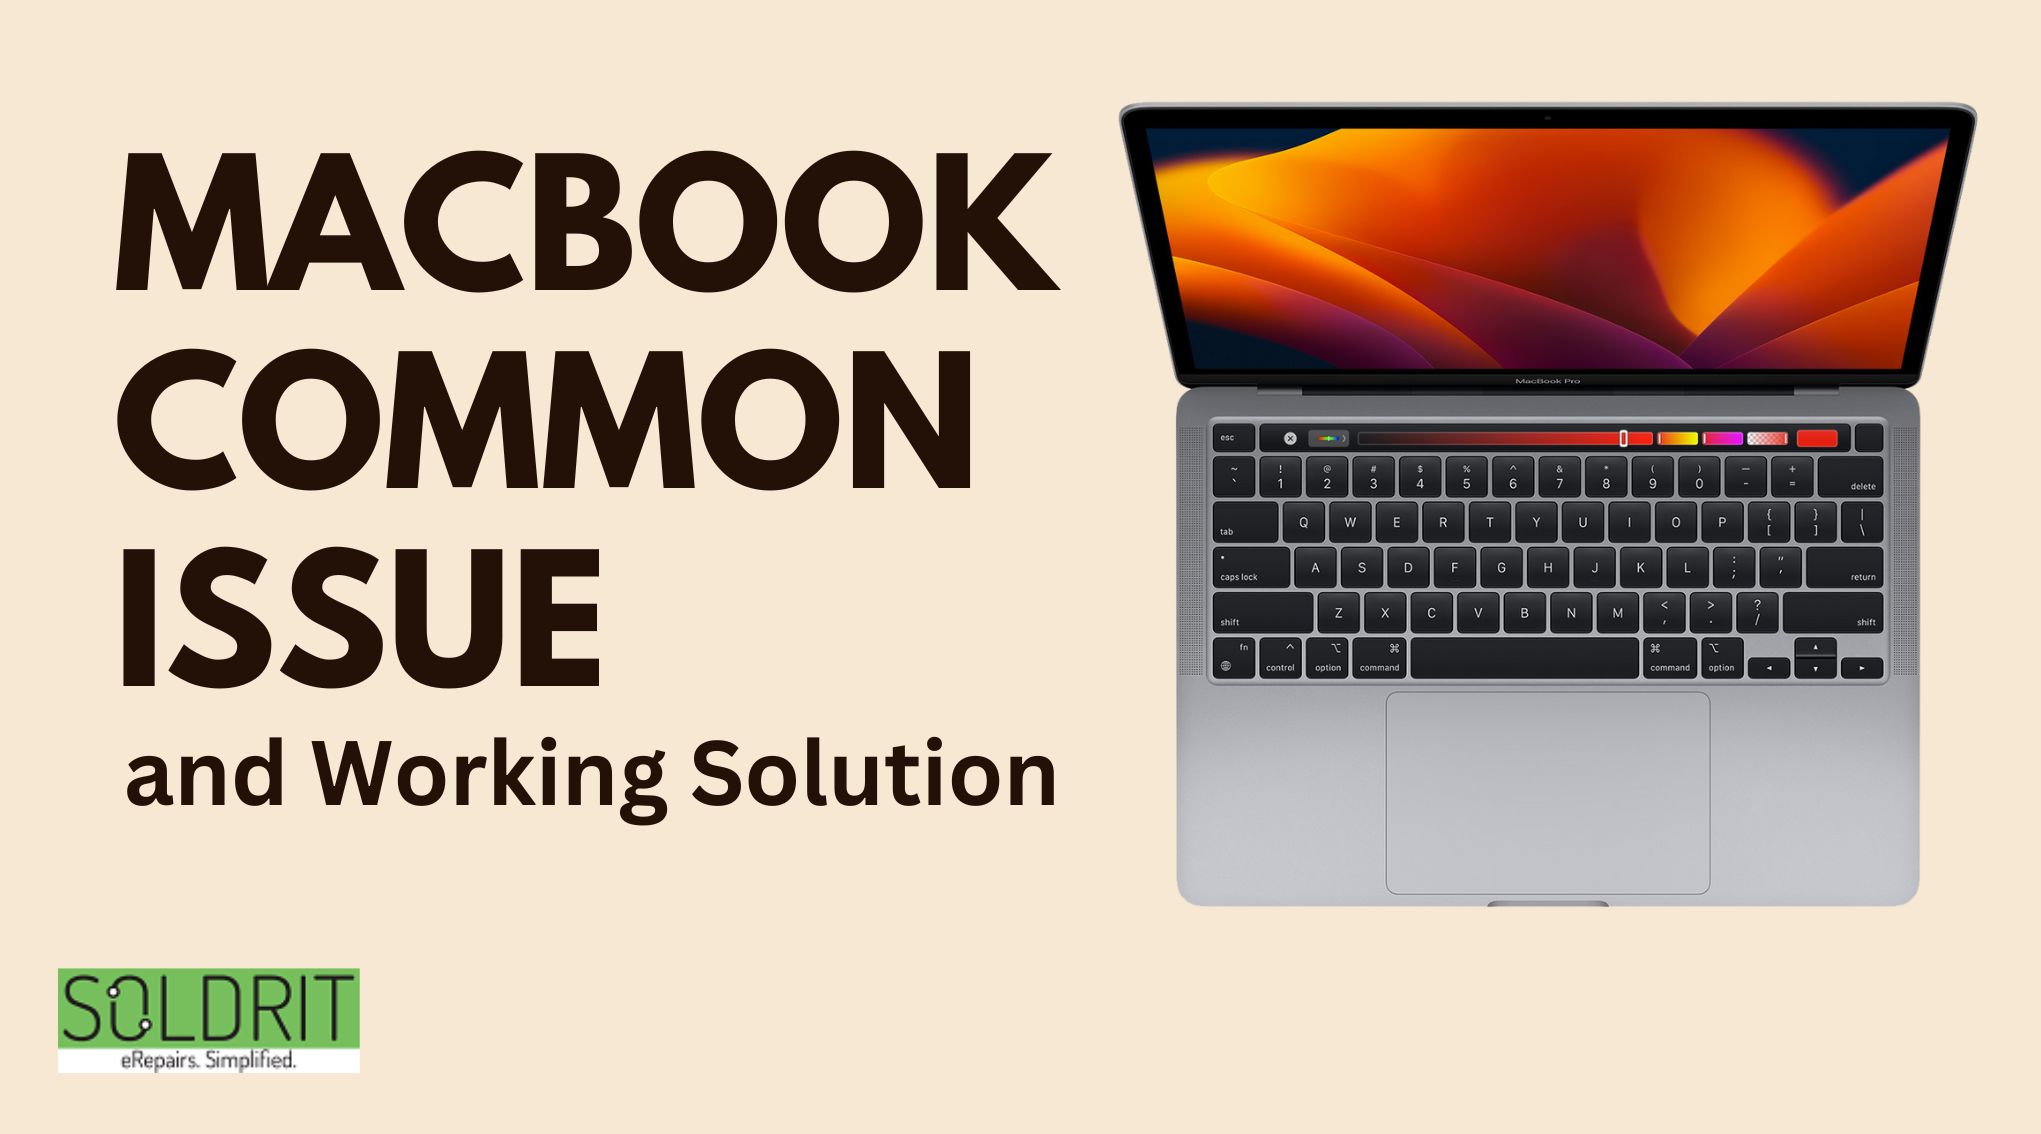 MacBook Common Issue and Working Solution | MacBook repair